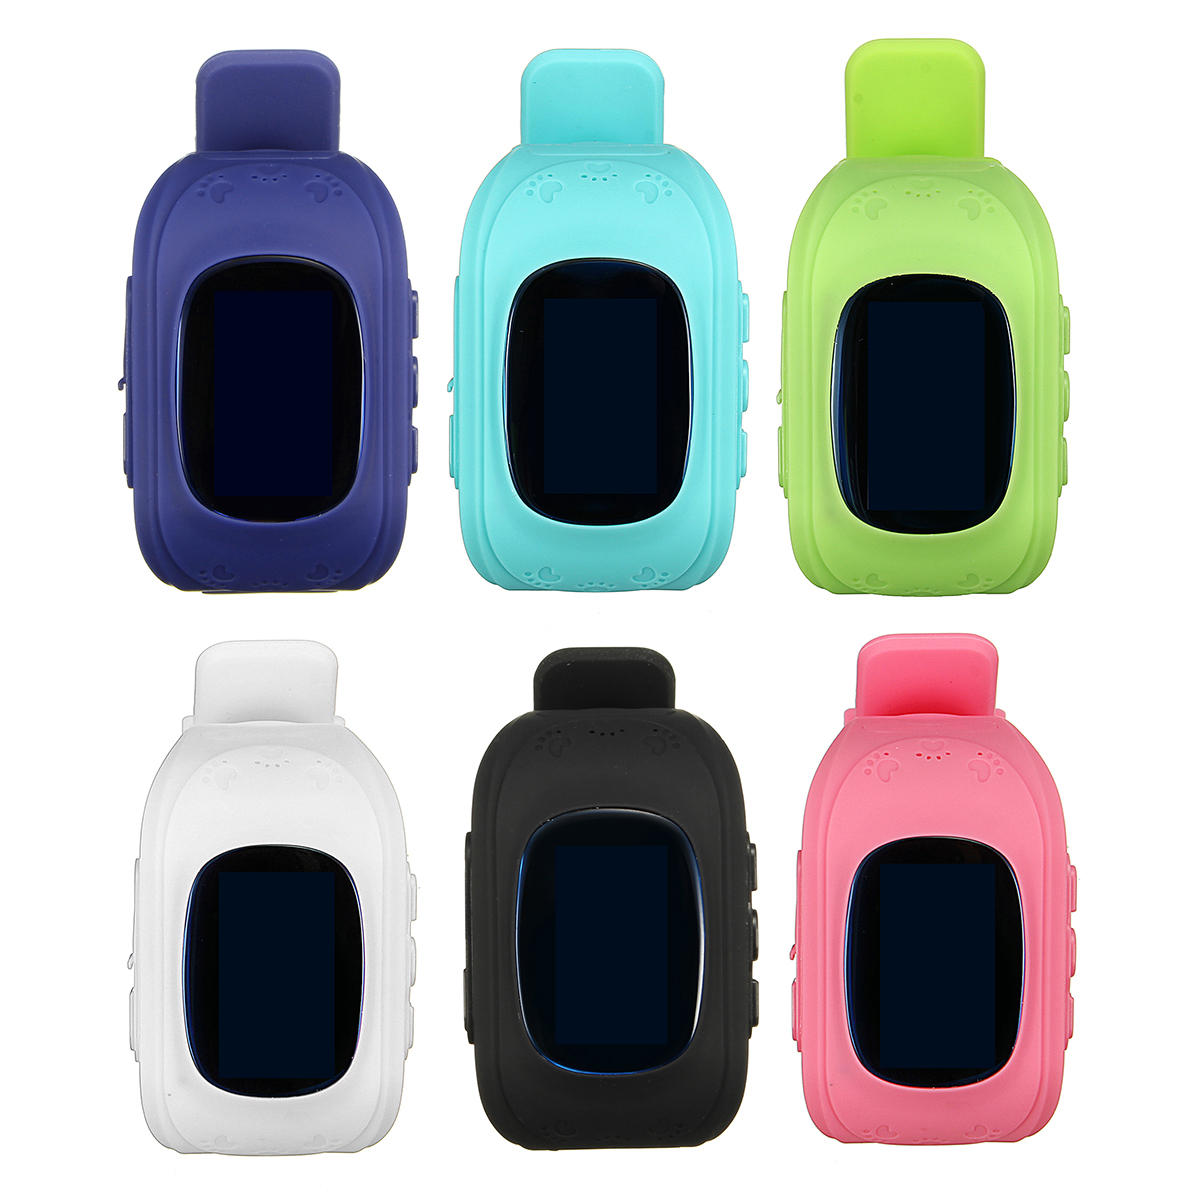 

Silicone Children Wrist Smart Watch GPS Positioning SOS Call Anti Lost Activity Tracker Device